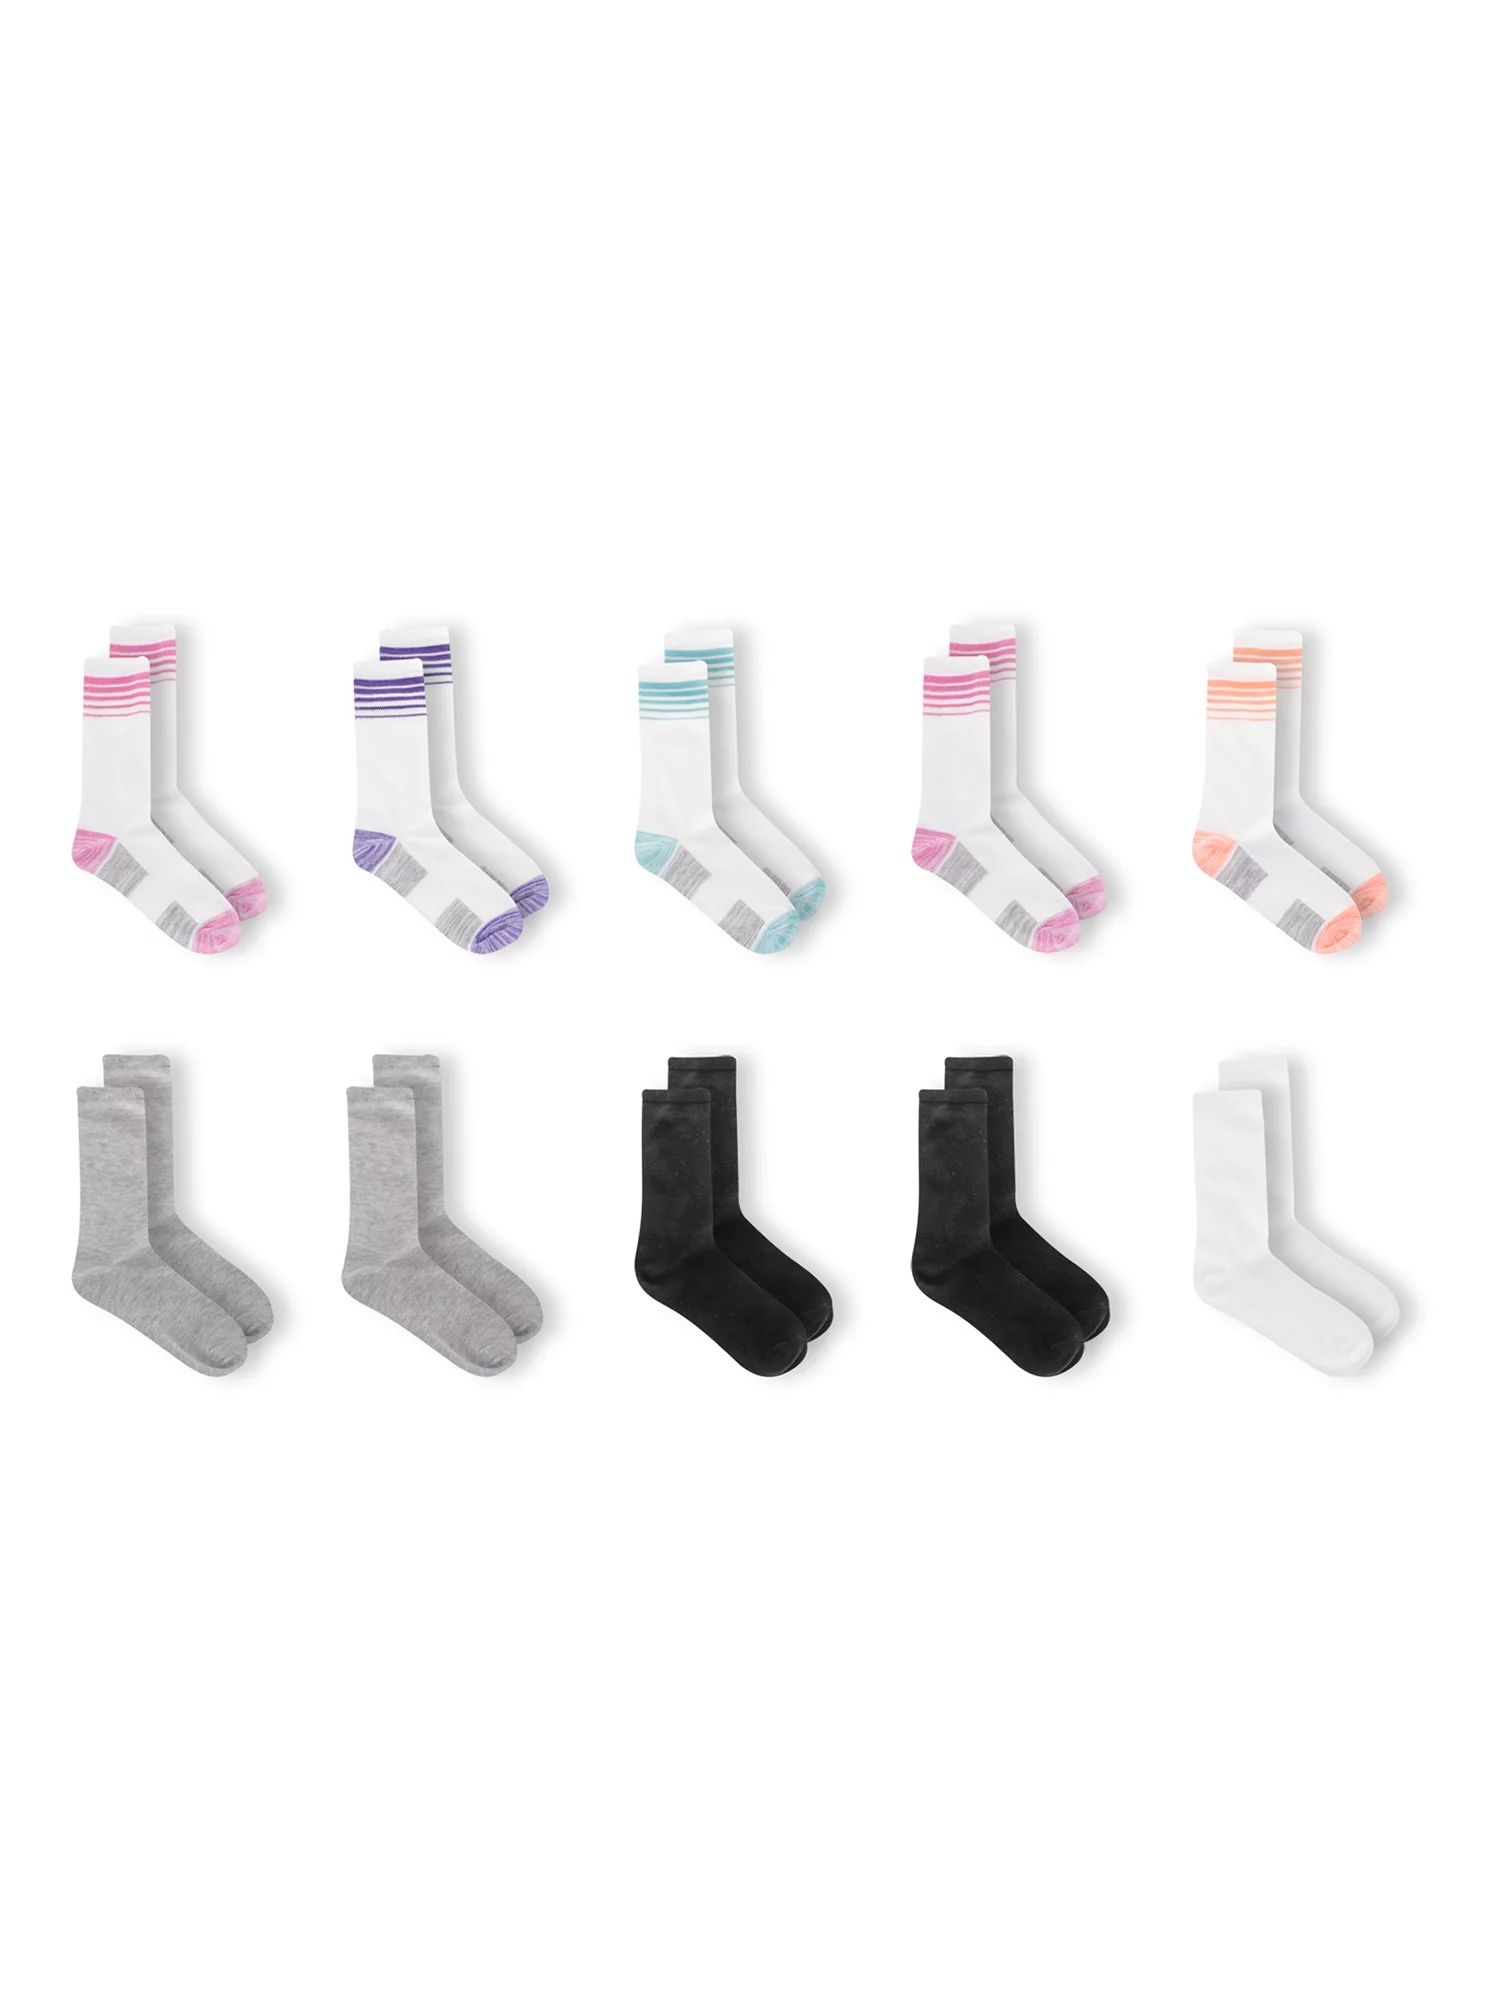 Athletic Works Girls Cushioned Crew Socks ,10 Pack, Size S (6-10.5)-L (4-10) | Walmart (US)